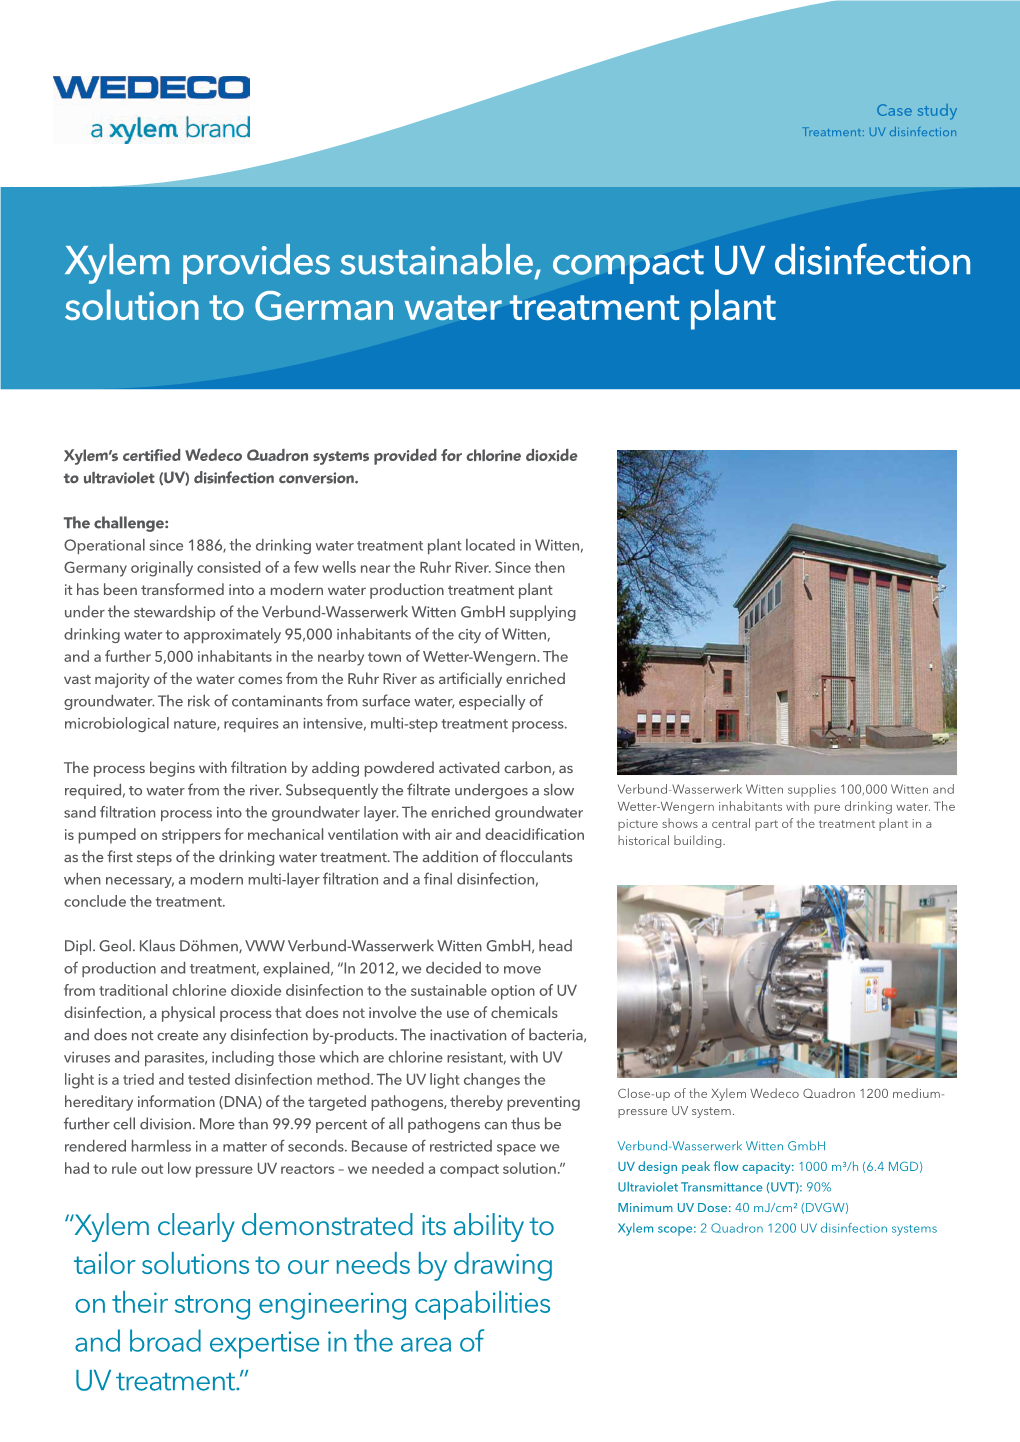 Xylem Provides Sustainable, Compact UV Disinfection Solution to German Water Treatment Plant